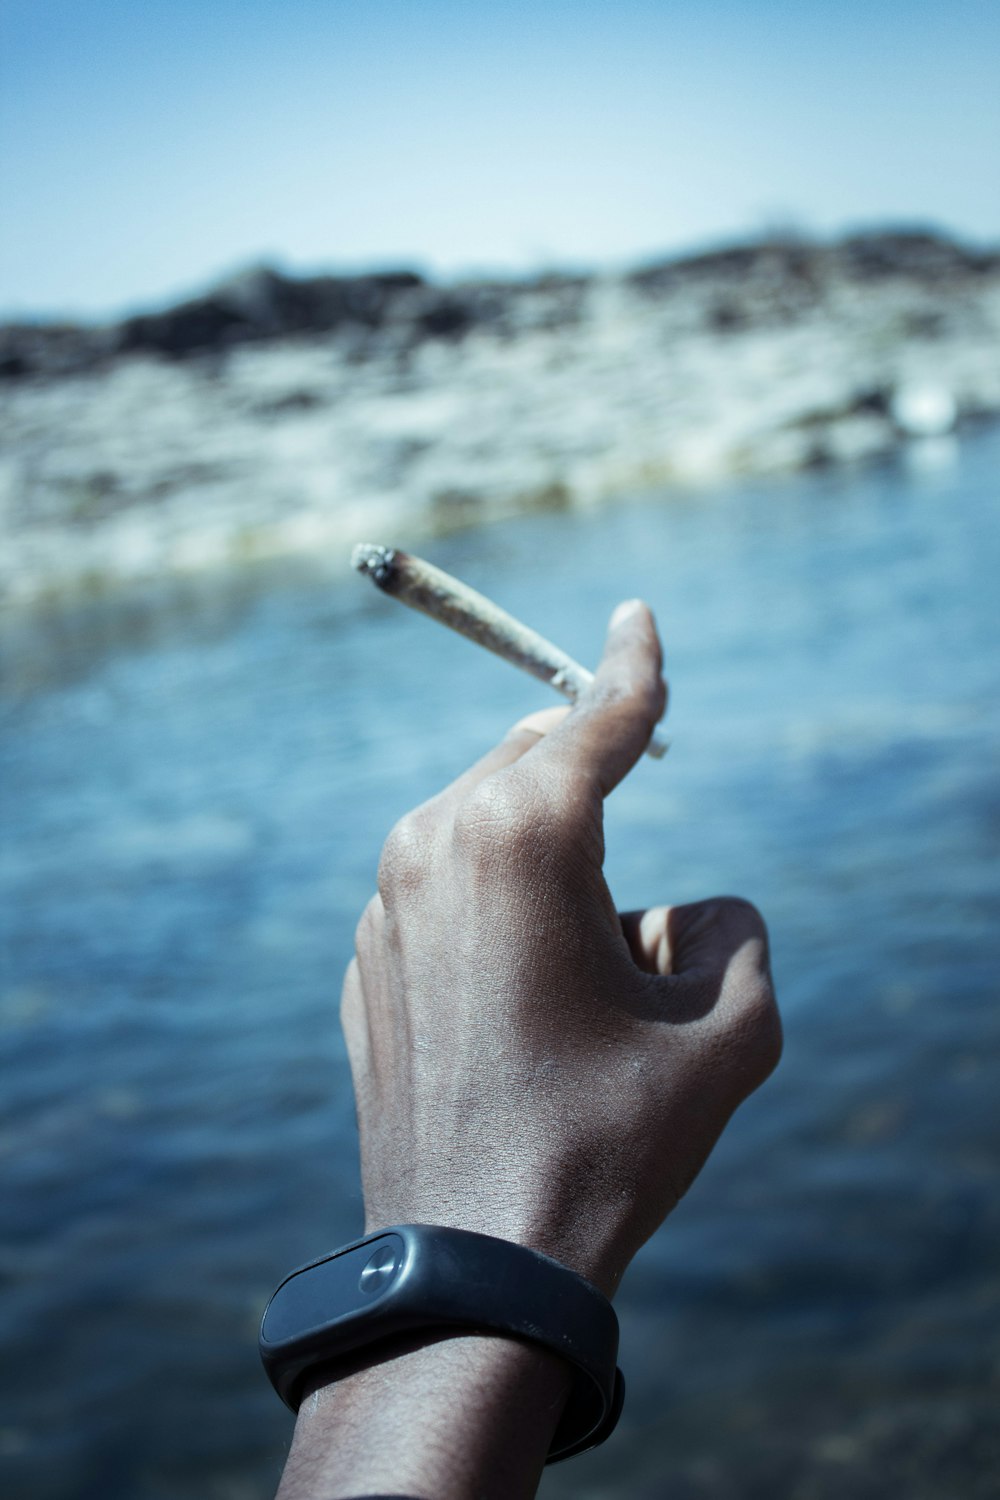 a hand holding a cigarette in front of a body of water